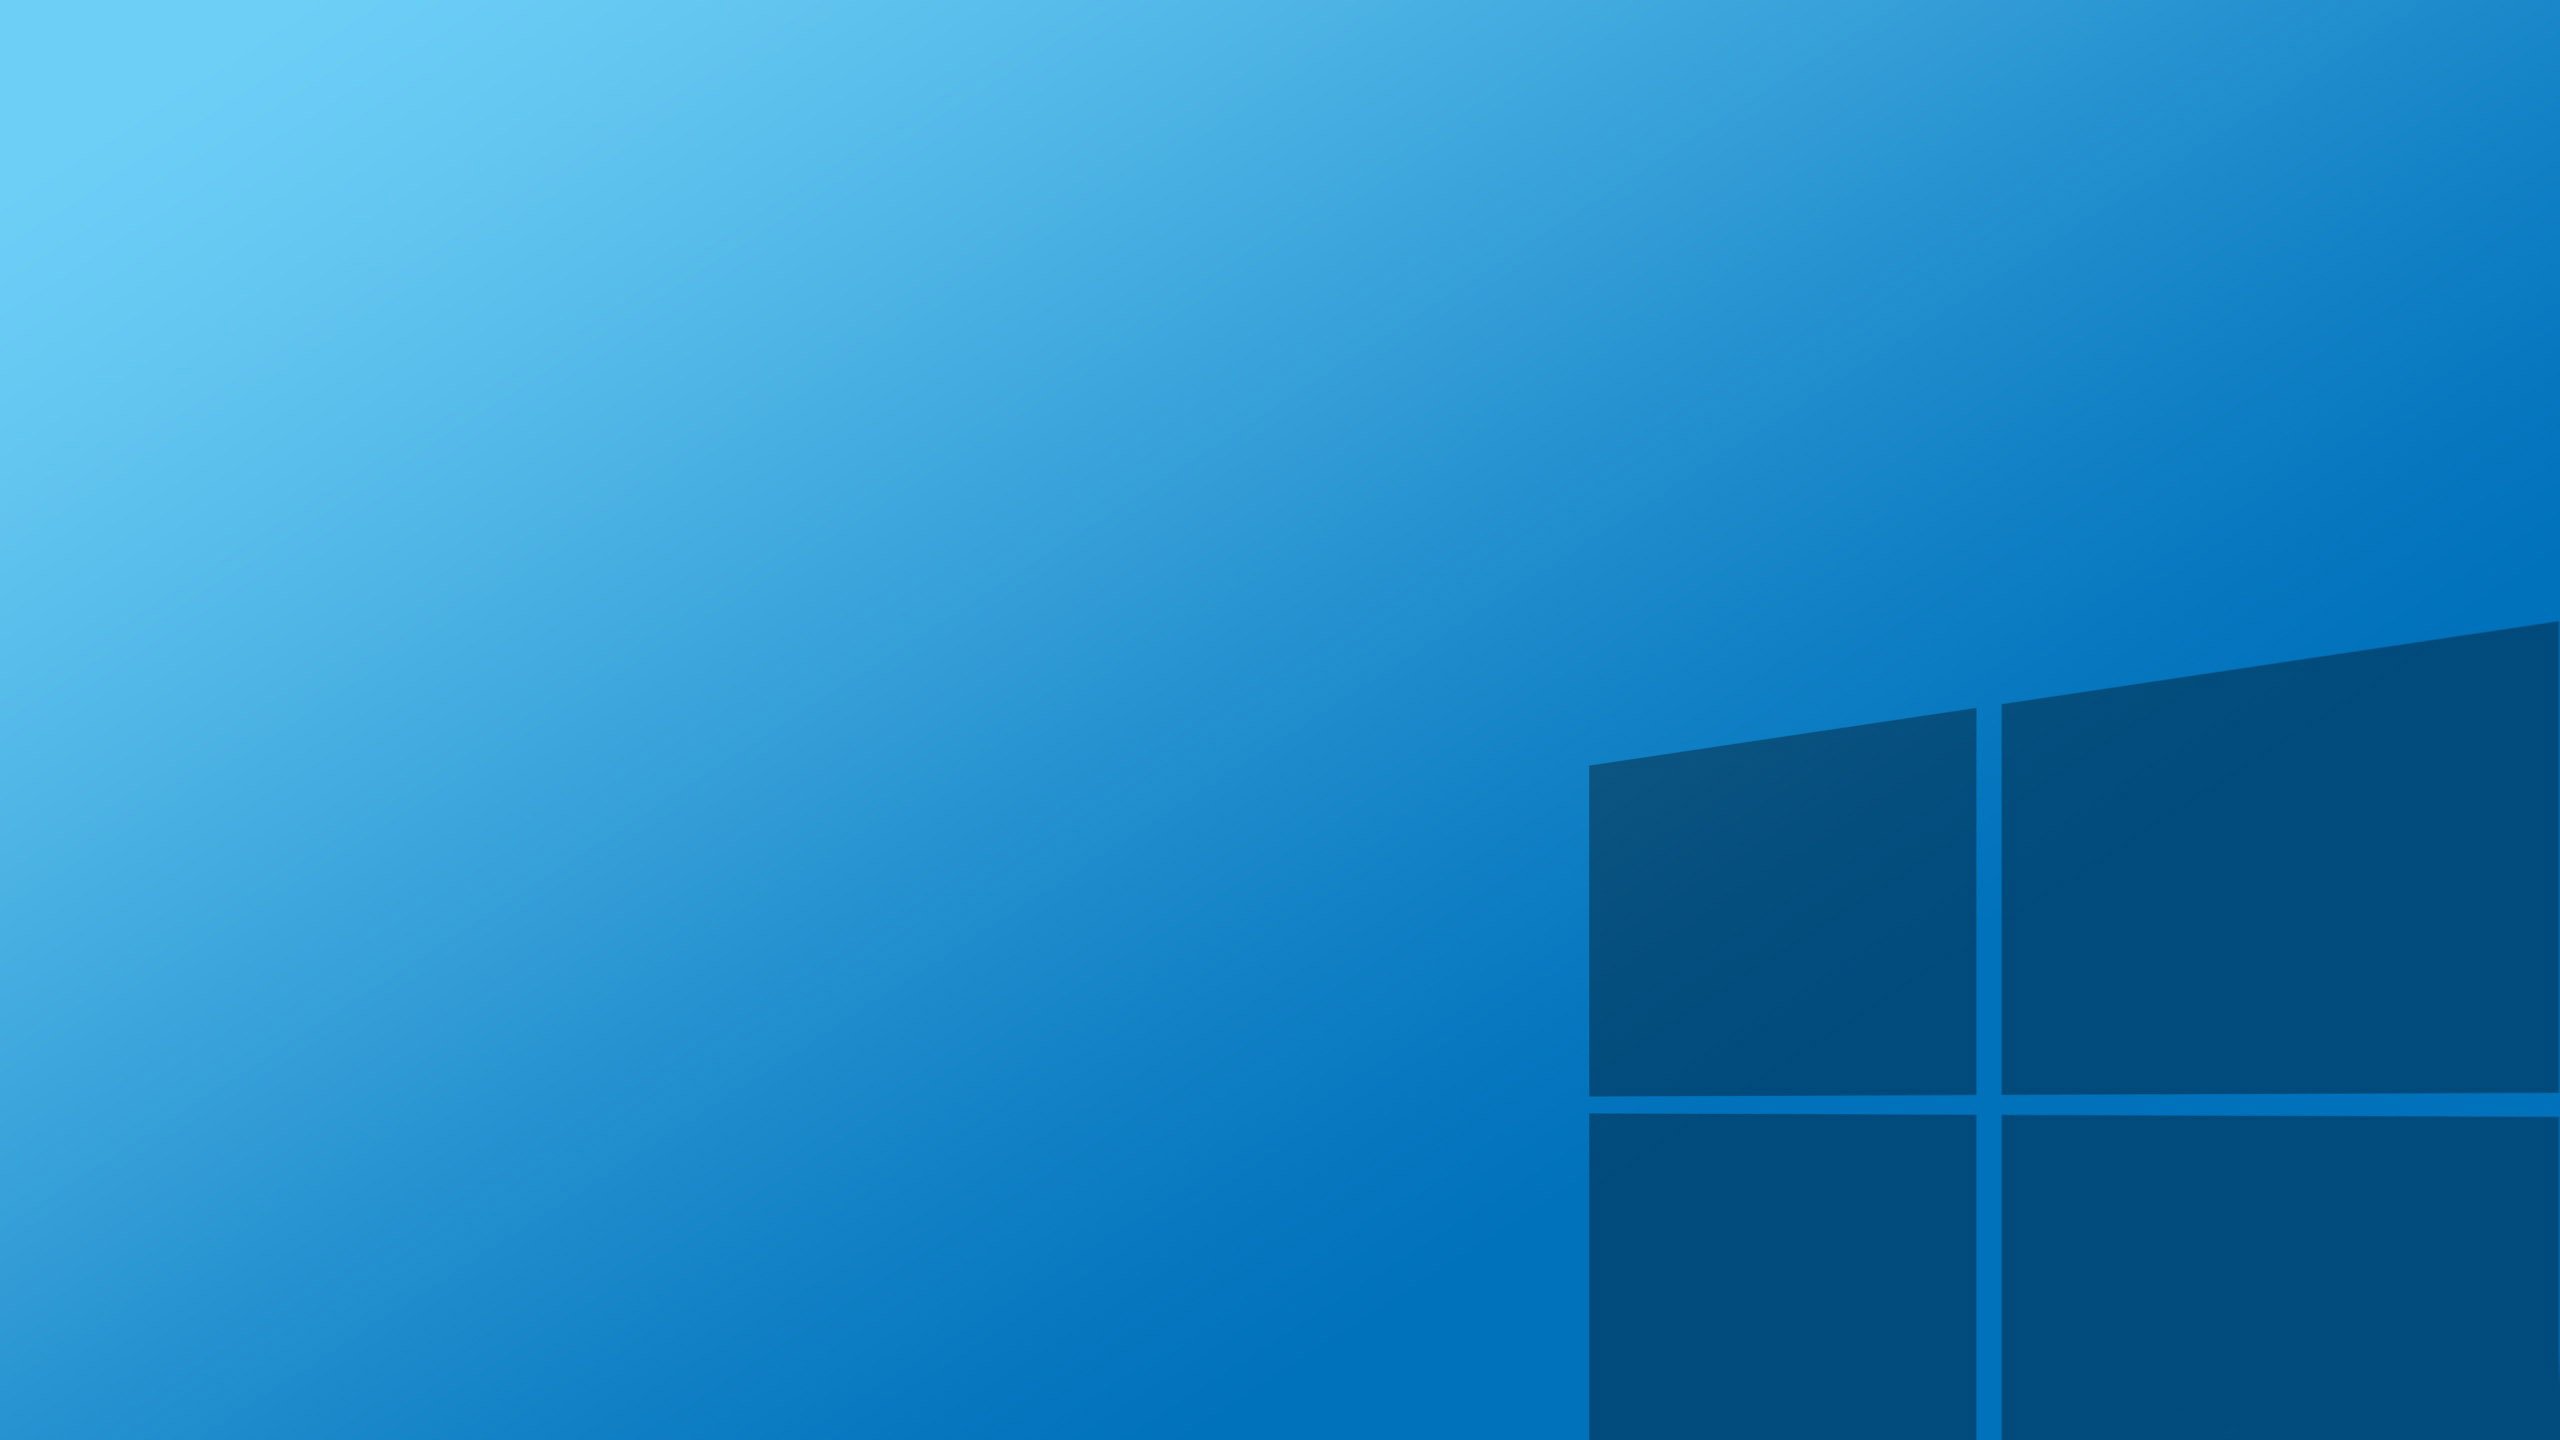 windows, 10, Microsoft, Computer Wallpapers HD / Desktop and Mobile  Backgrounds